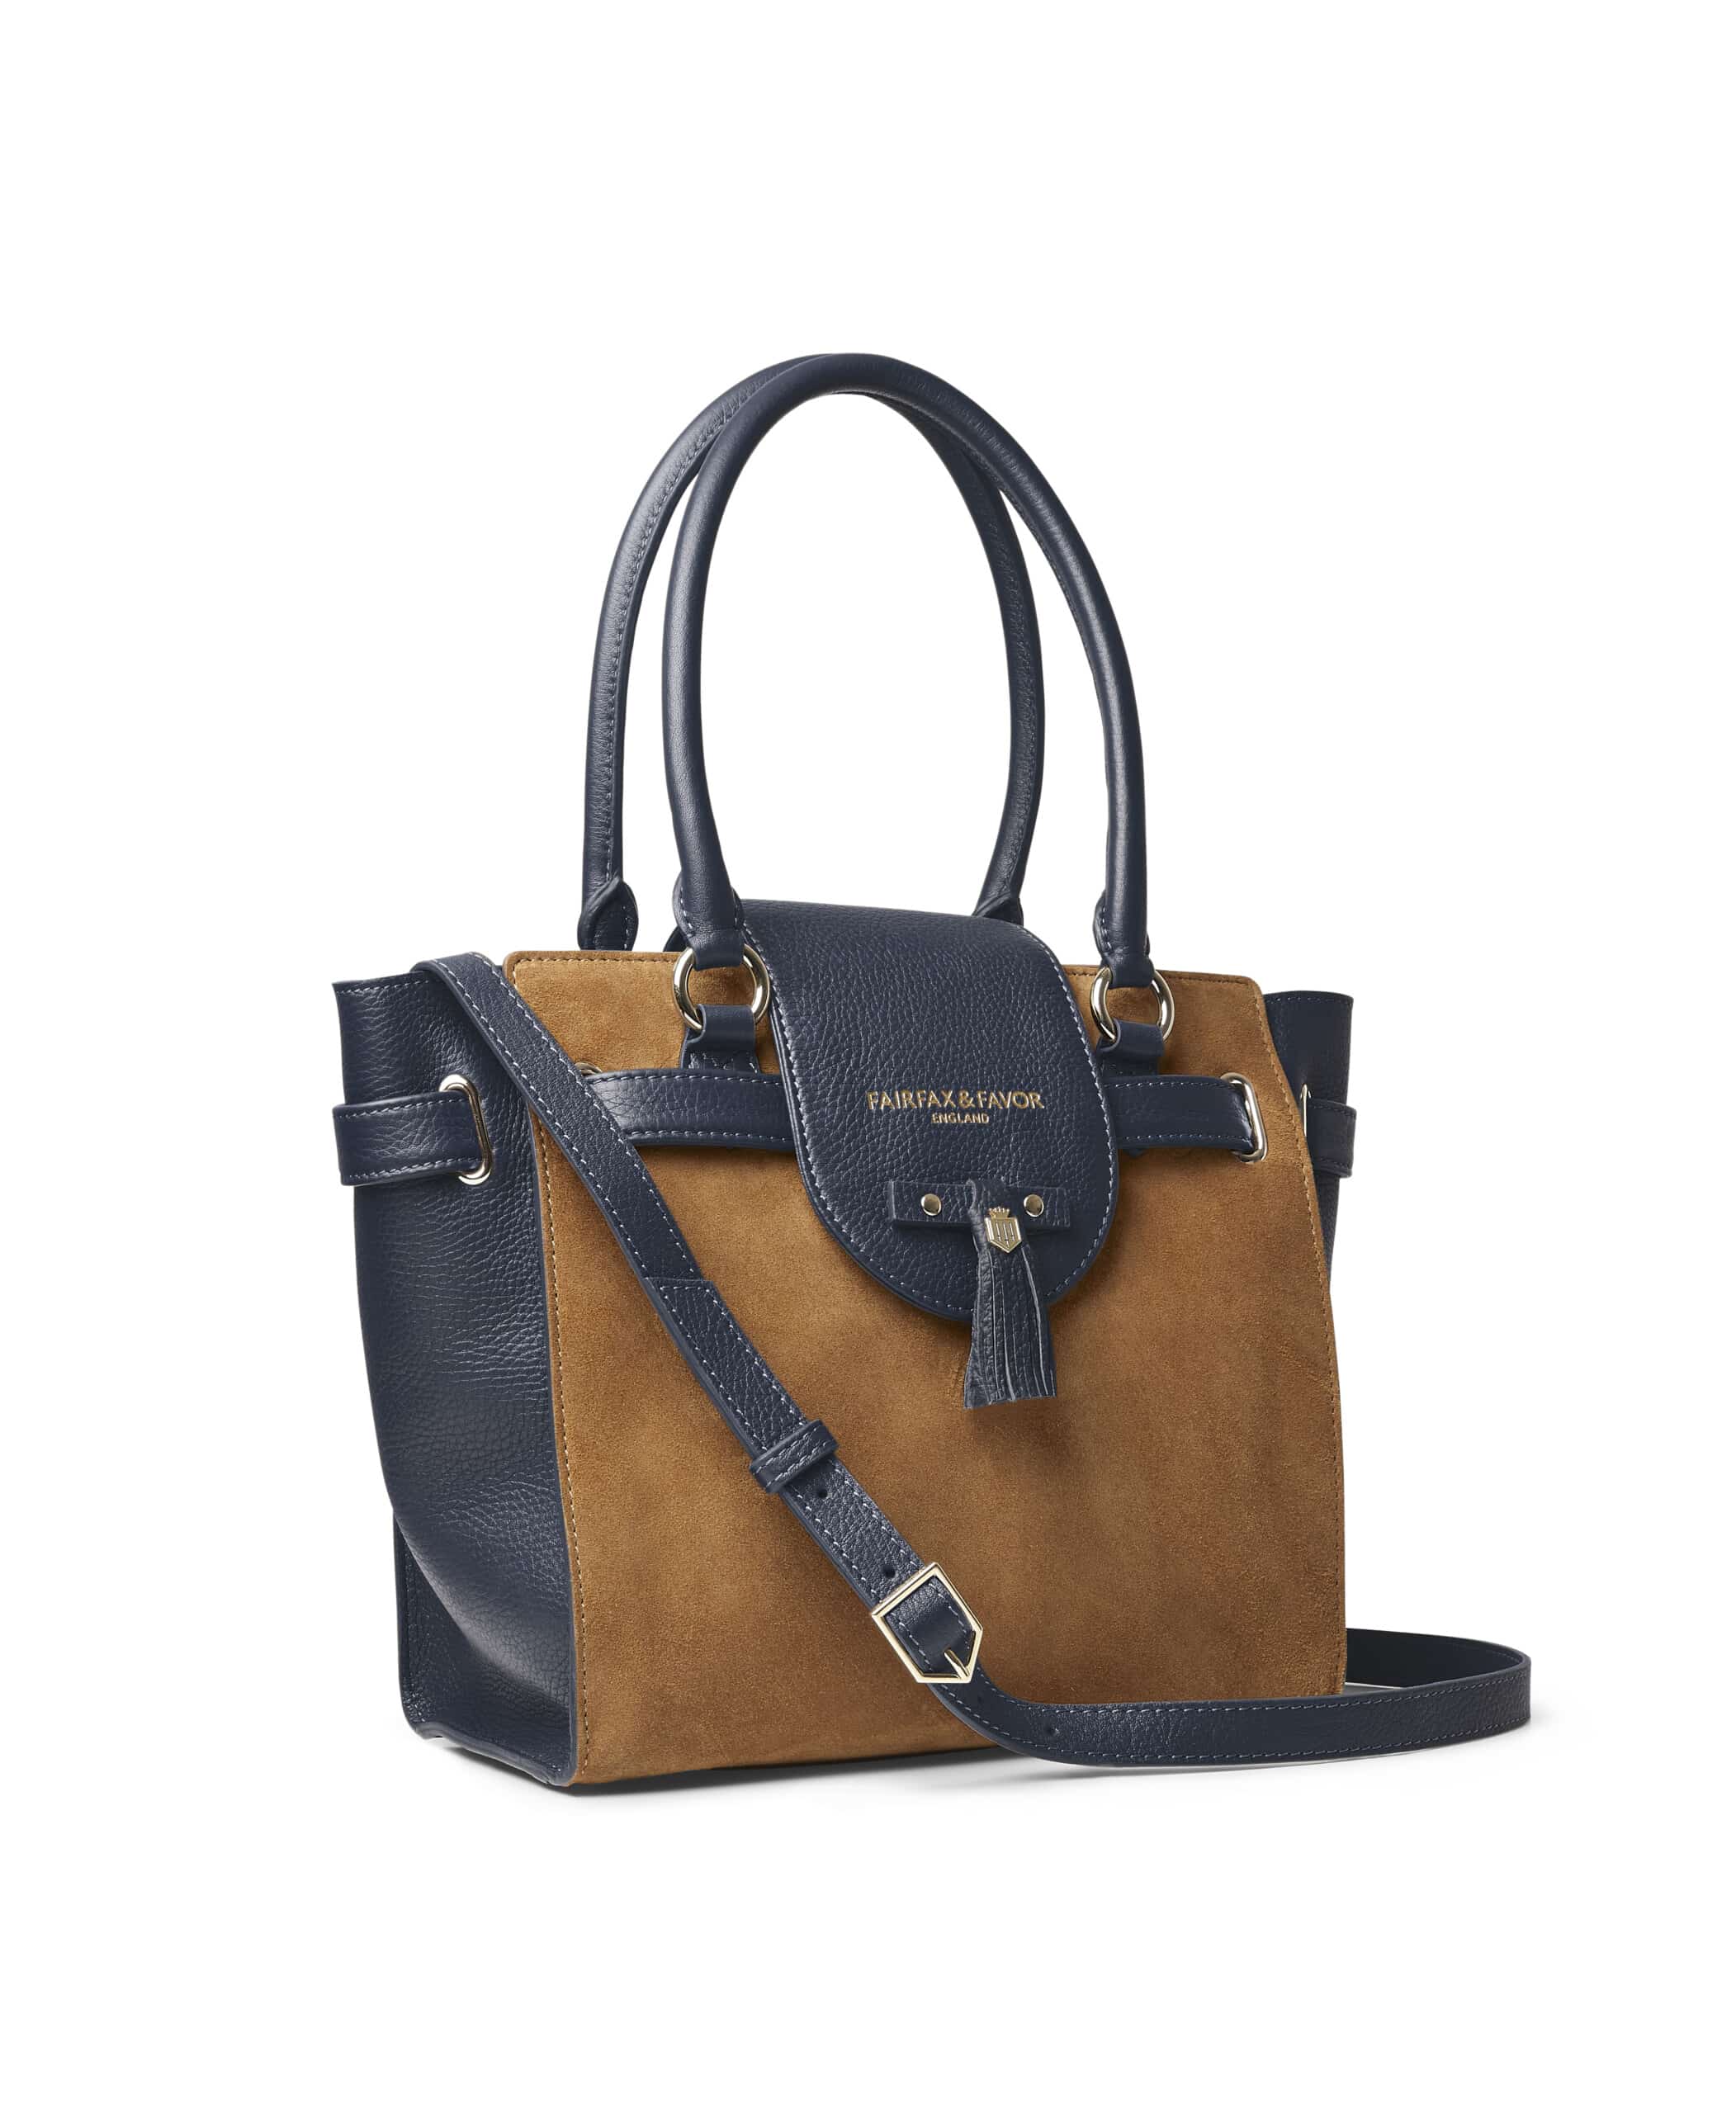 Windsor Tote in Tan and Navy